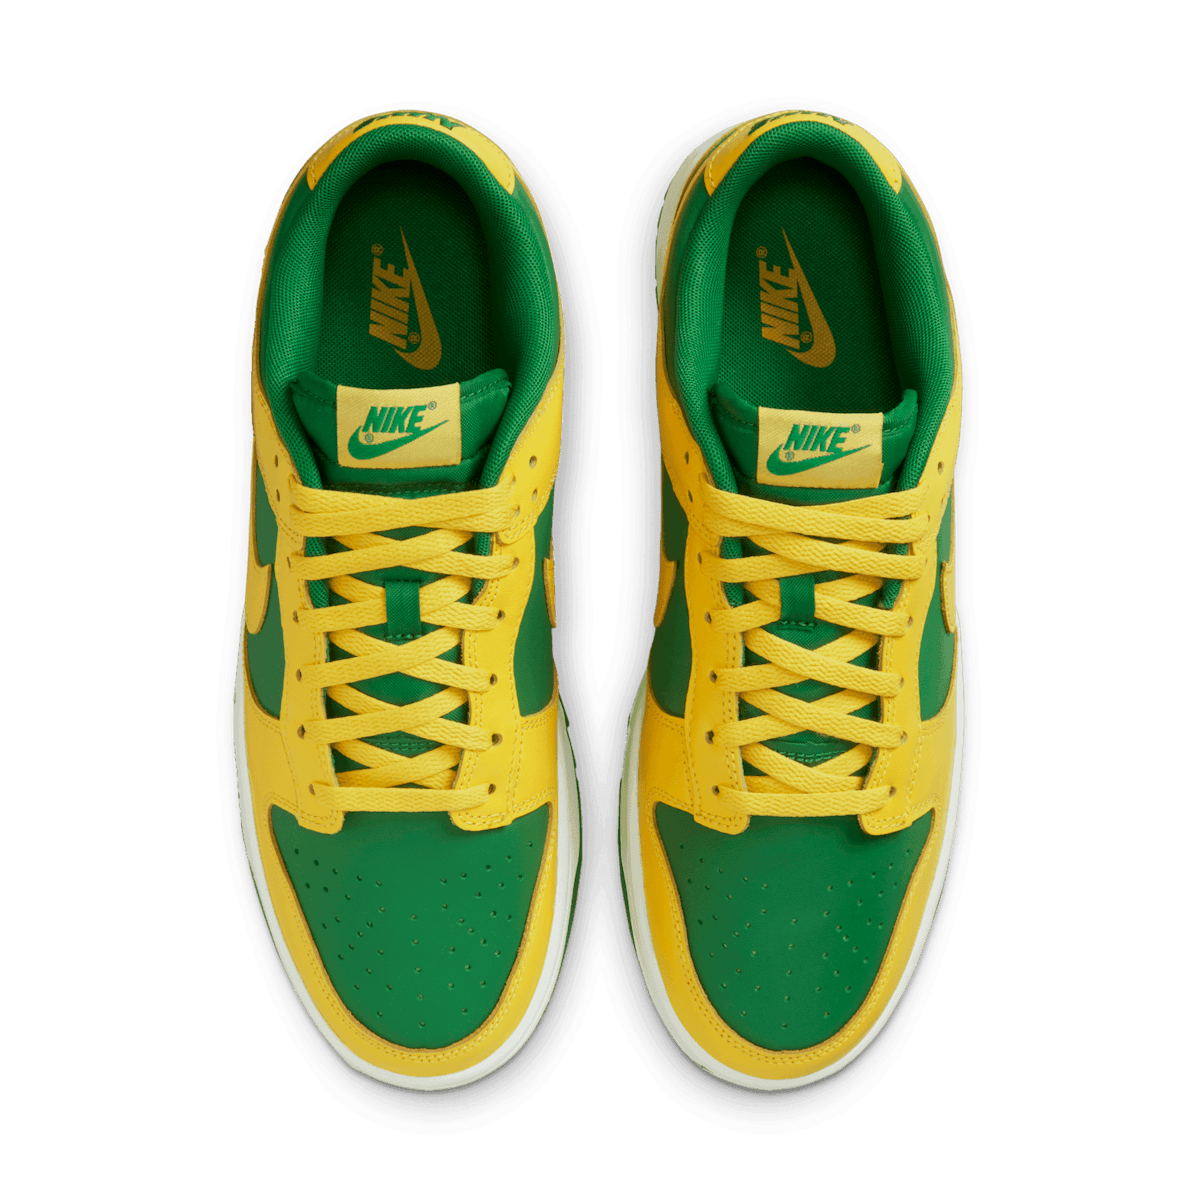 DUNK LOW REVERSE BRAZIL- ANOTHER BAD QUALITY DUNK! 